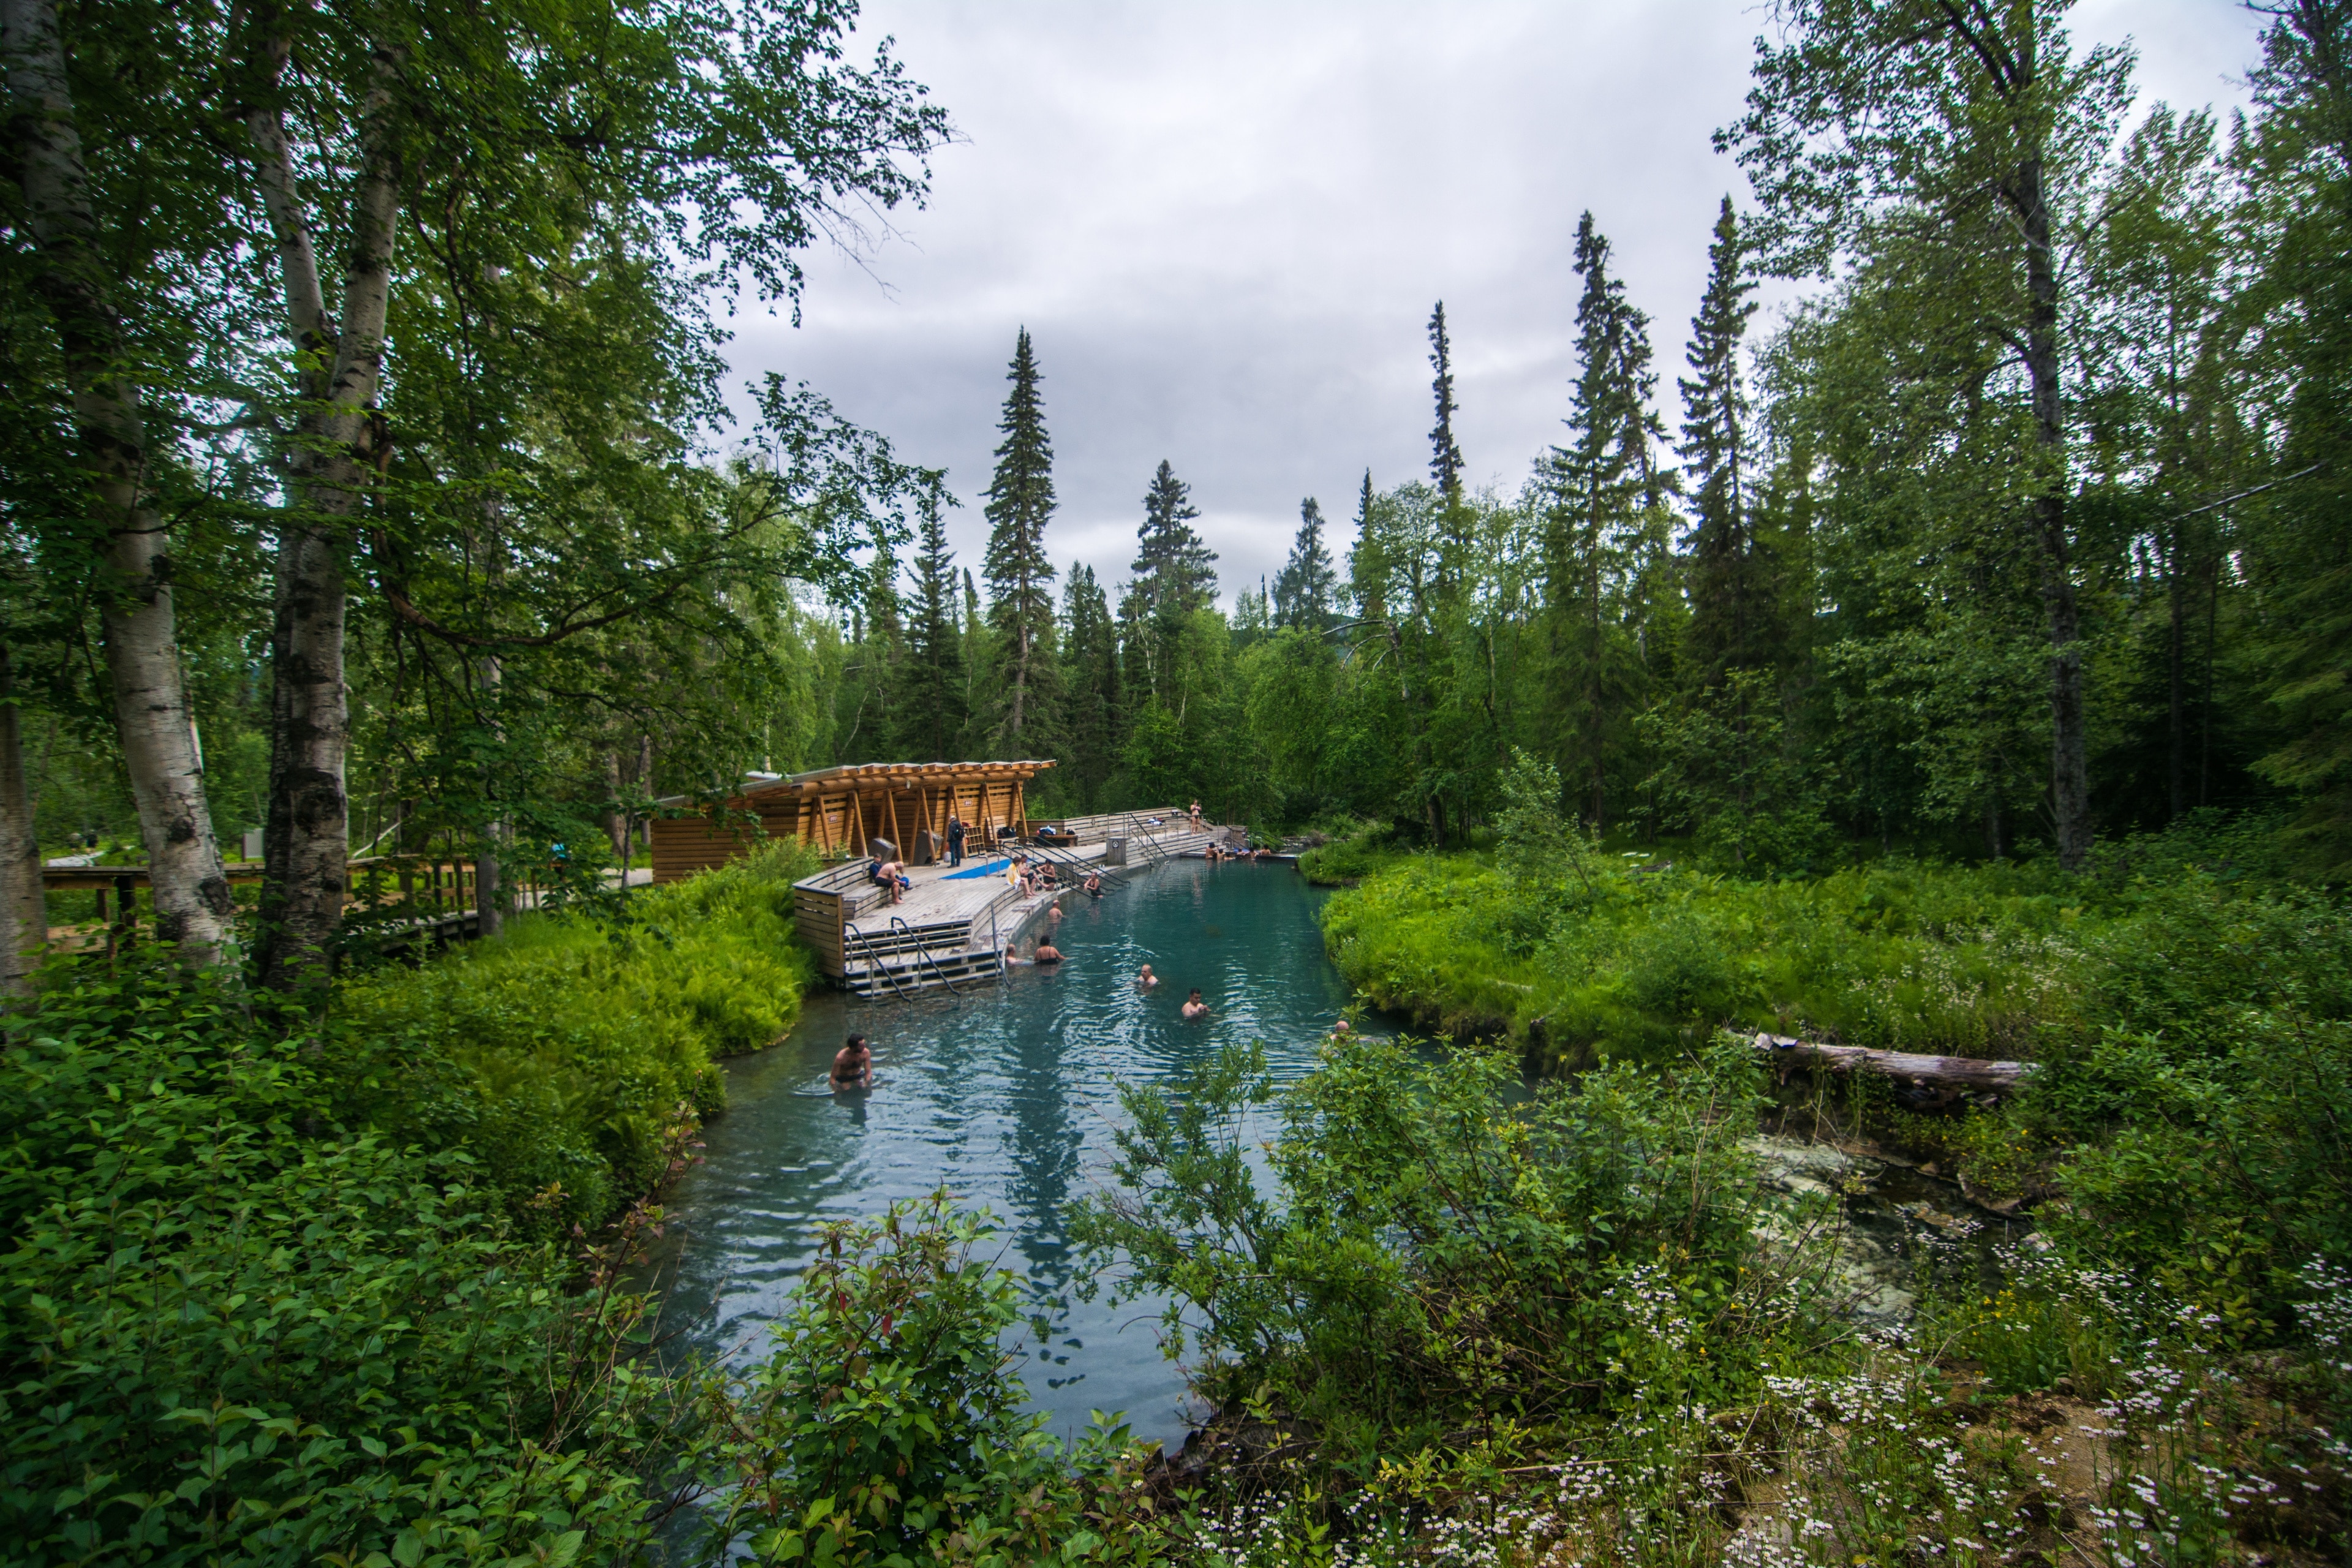 nestled in the wilderness of northern BC, lies a small wilderness hot spring maintained beautifully BC parks, this amazing spot is just the right balance of nature and comfort boasting temperatures ranging from hot to cooler the farther down the river you go. #Adventure